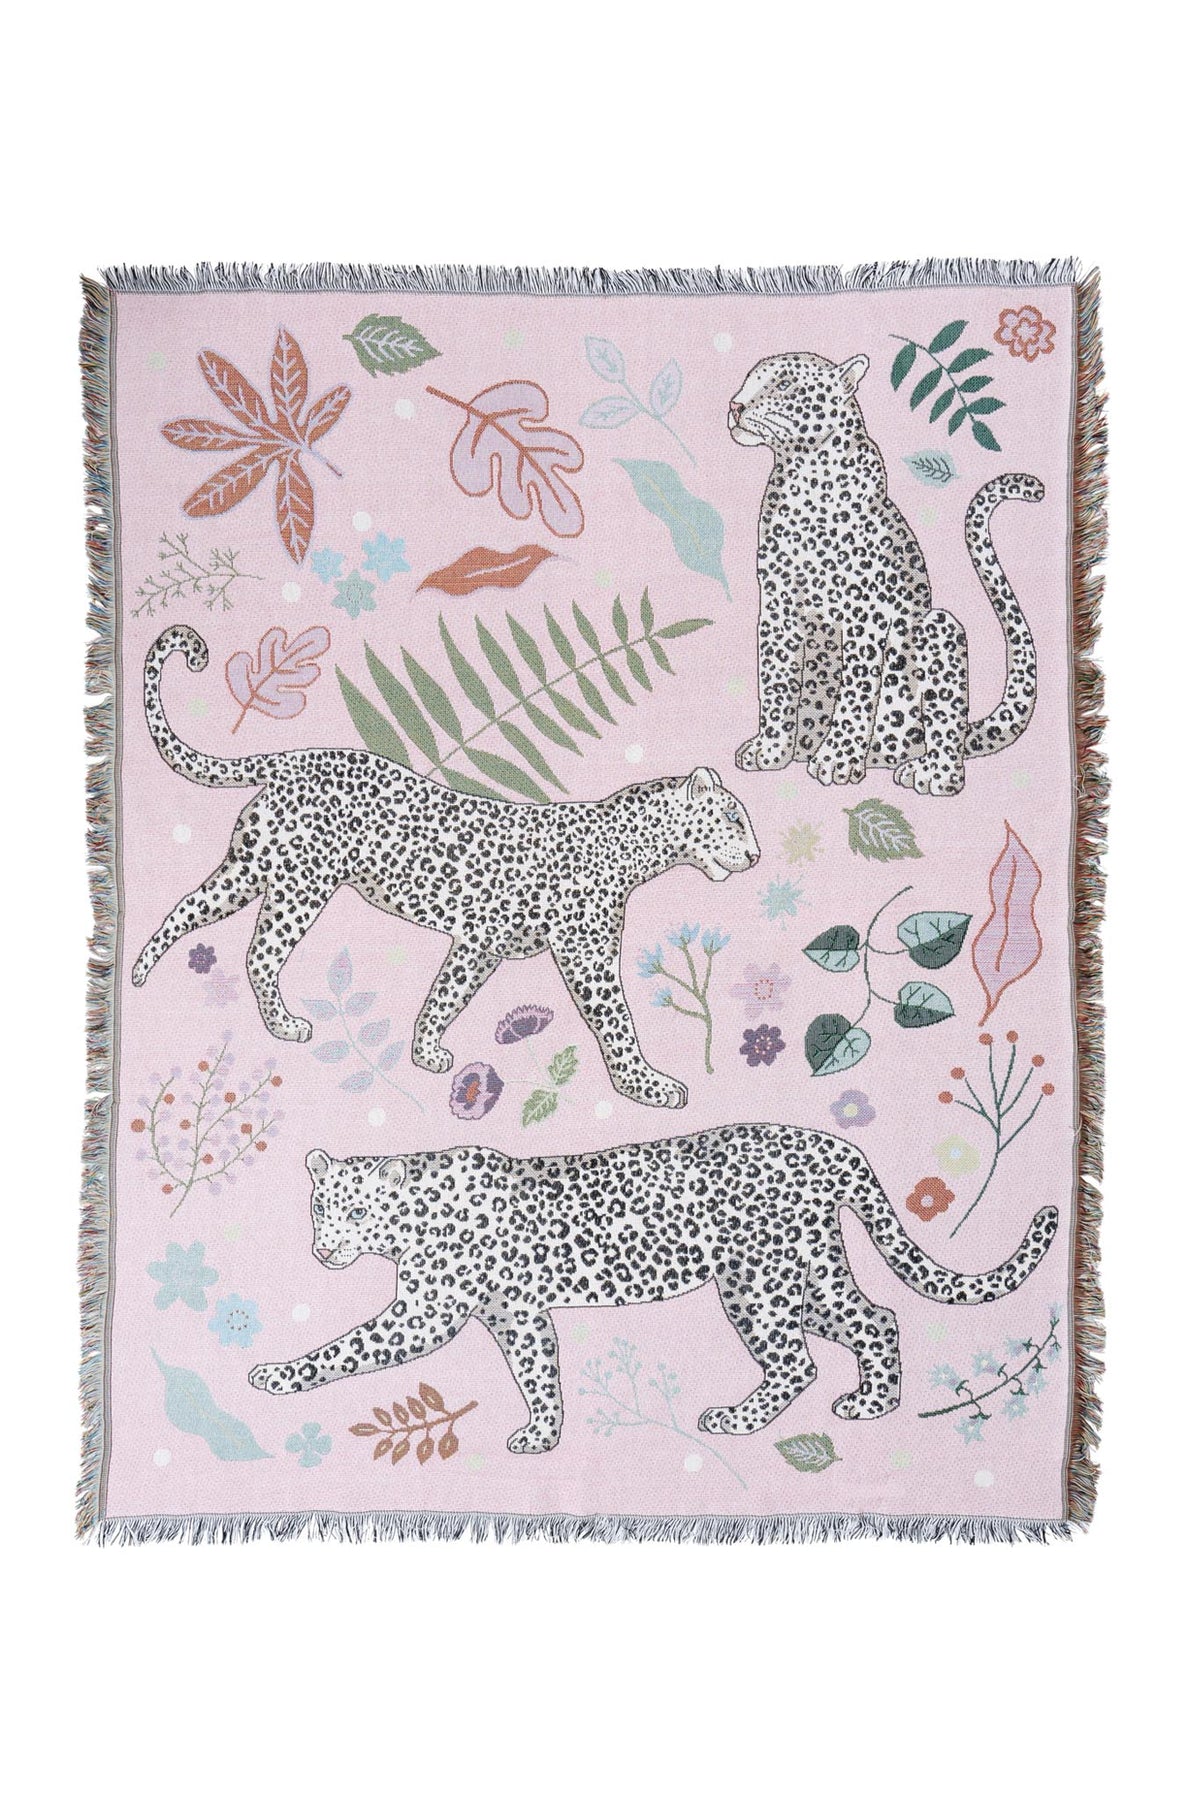 Snow Leopard Blanket by Karen Mabon with three snow leopards pink blankets surrounded by leaves.